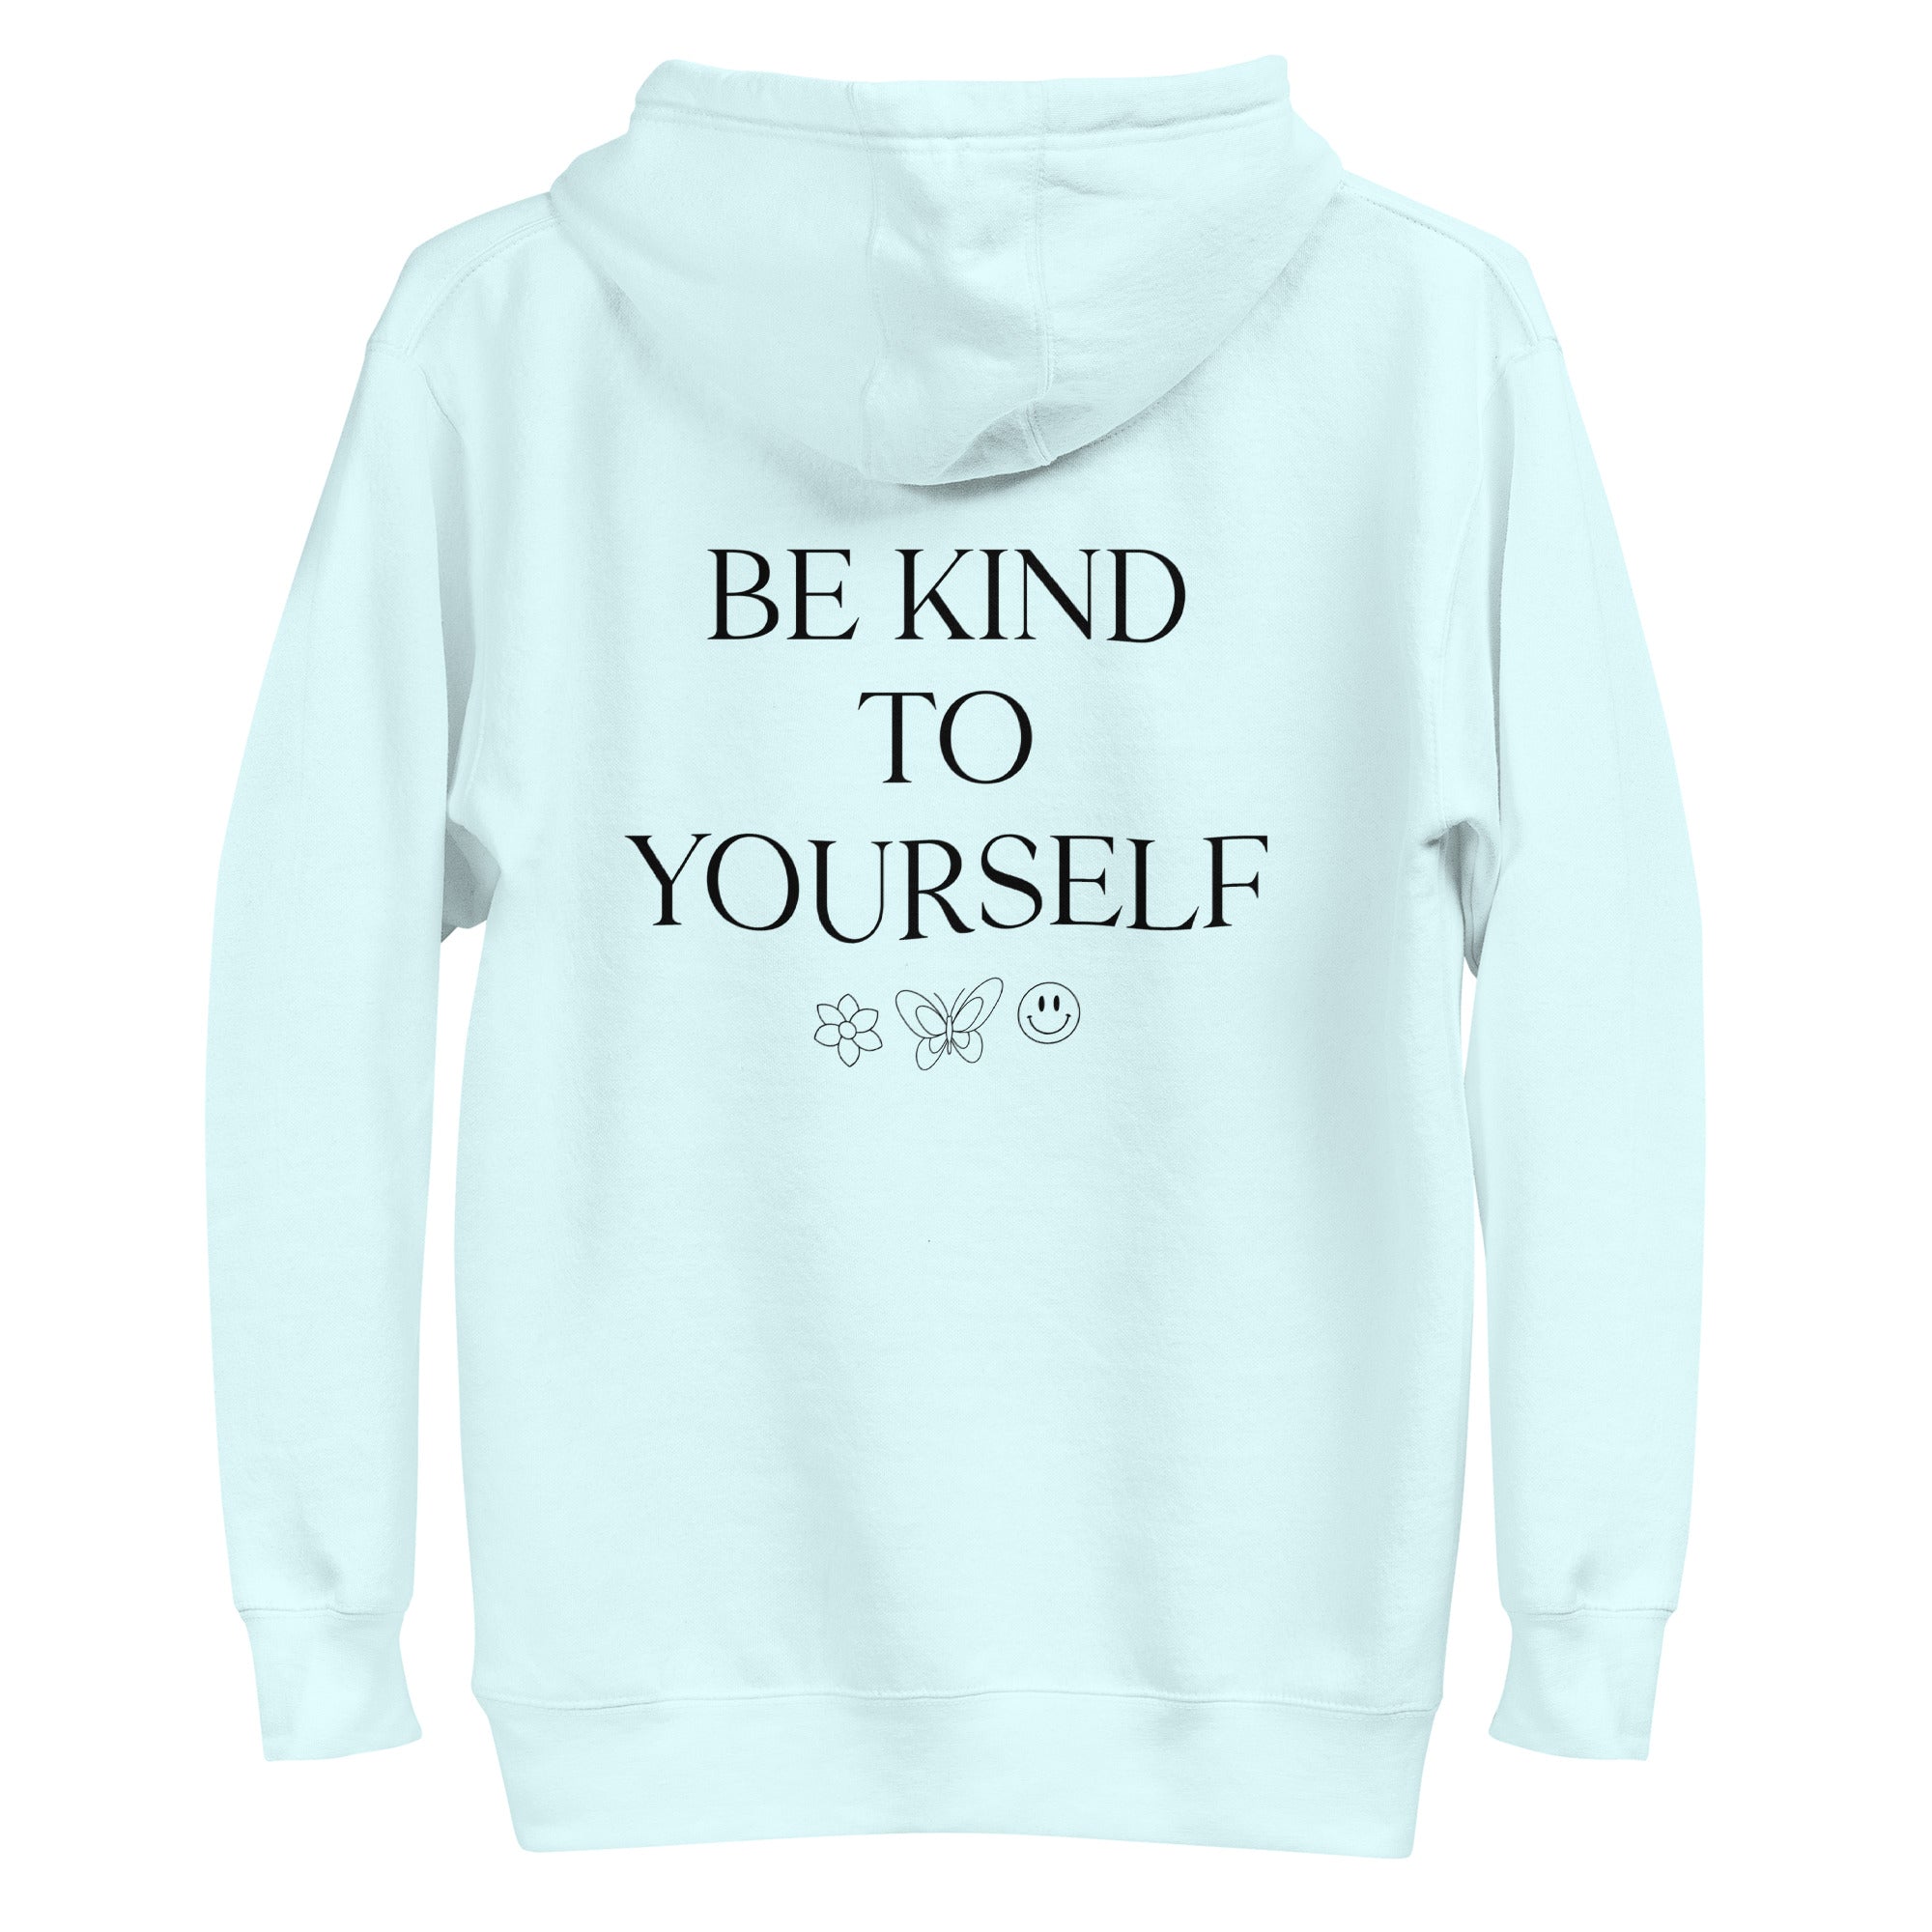 Be Kind To Yourself Women's Hoodie